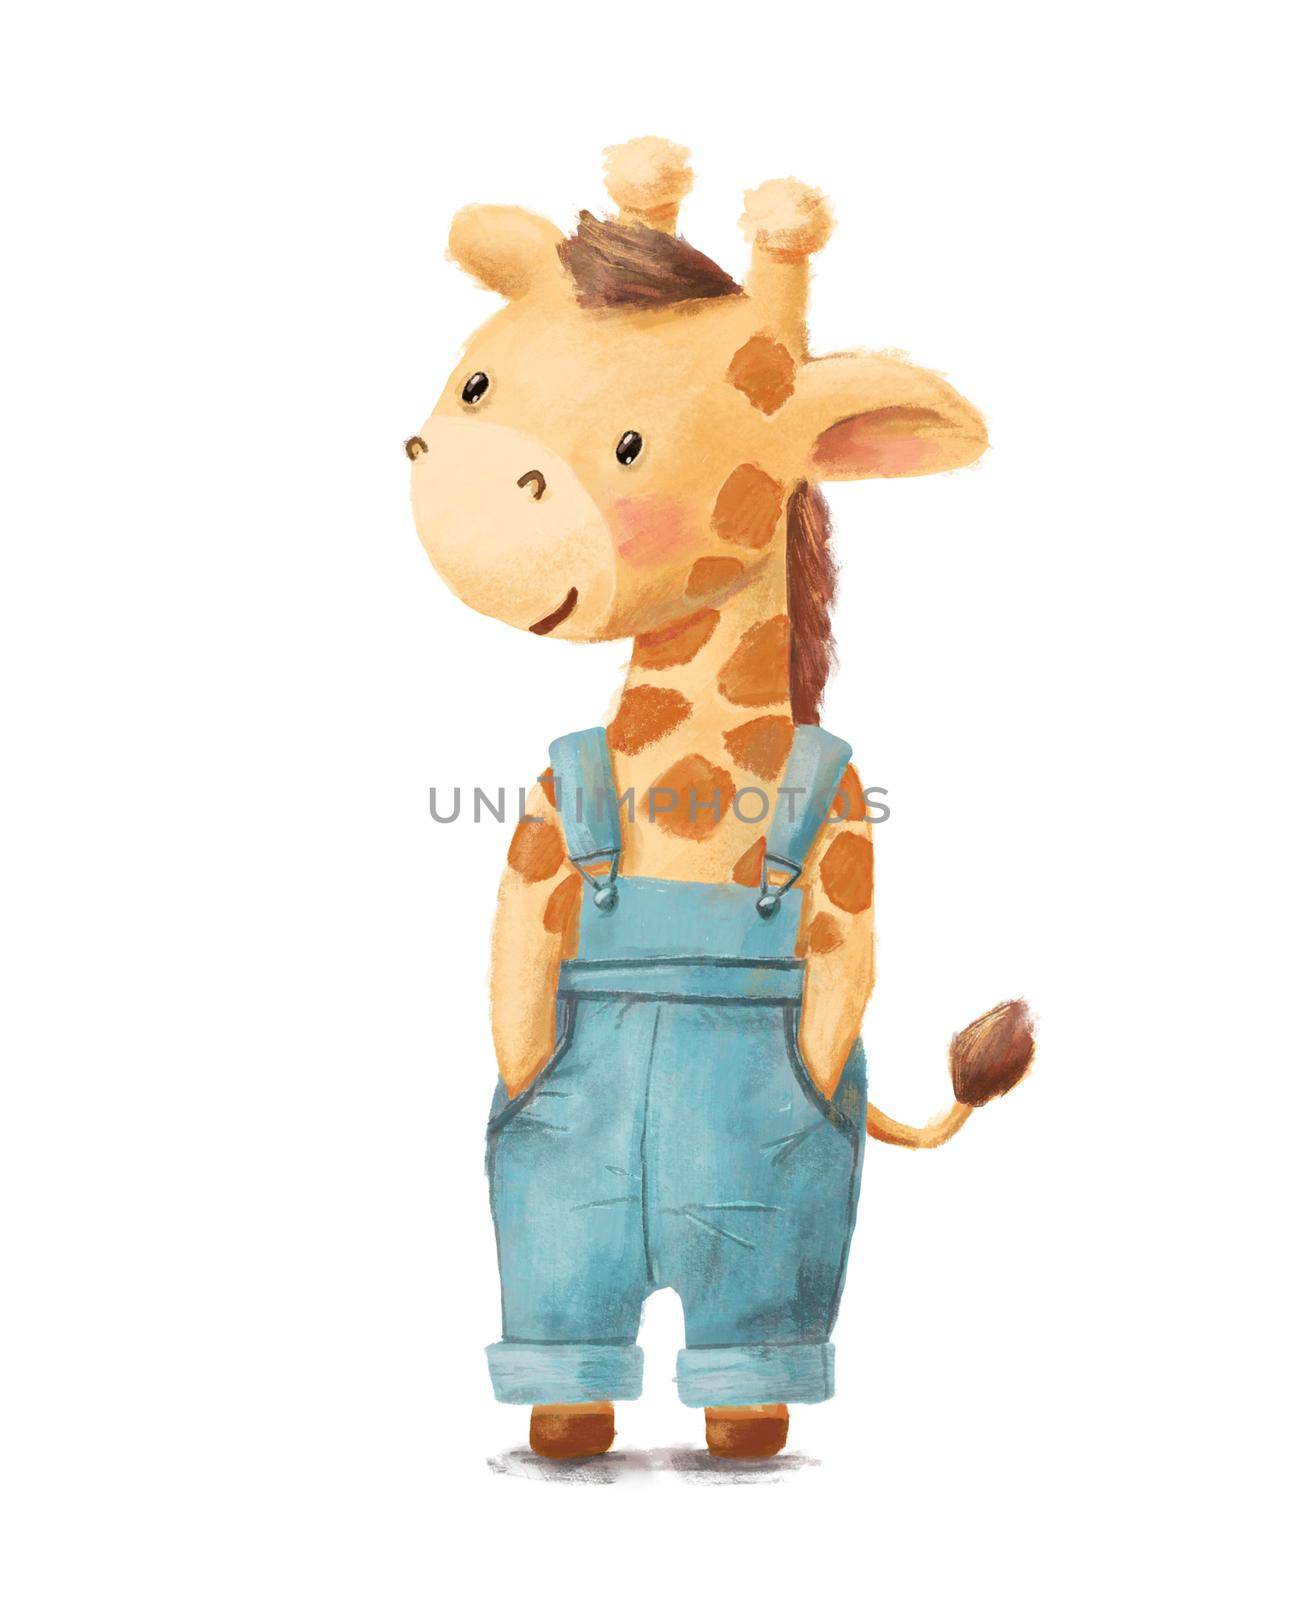 Cute funny standing giraffe in clothes jeans. Character illustration Isolated on white background. by ElenaPlatova